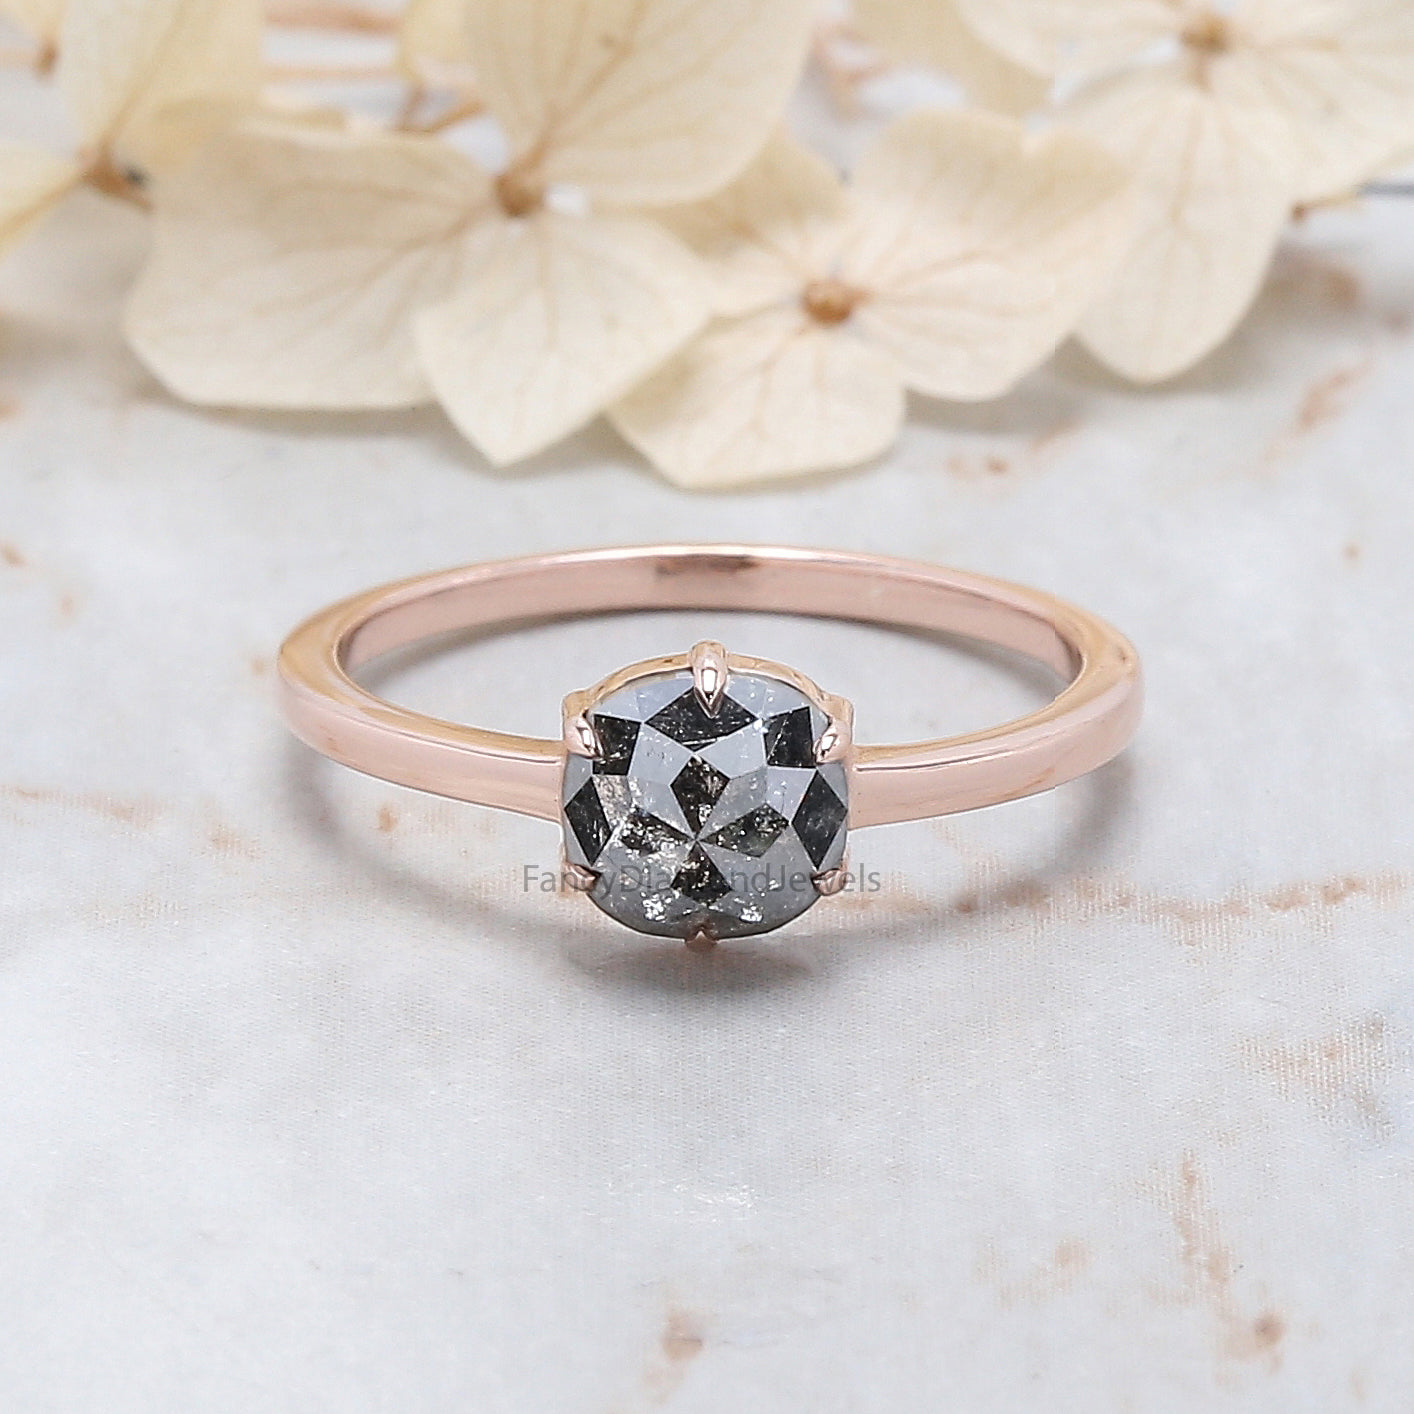 Cushion Cut Salt And Pepper Diamond Ring 1.20 Ct 6.30 MM Cushion Diamond Ring 14K Solid Rose Gold Silver Engagement Ring Gift For Her QN918